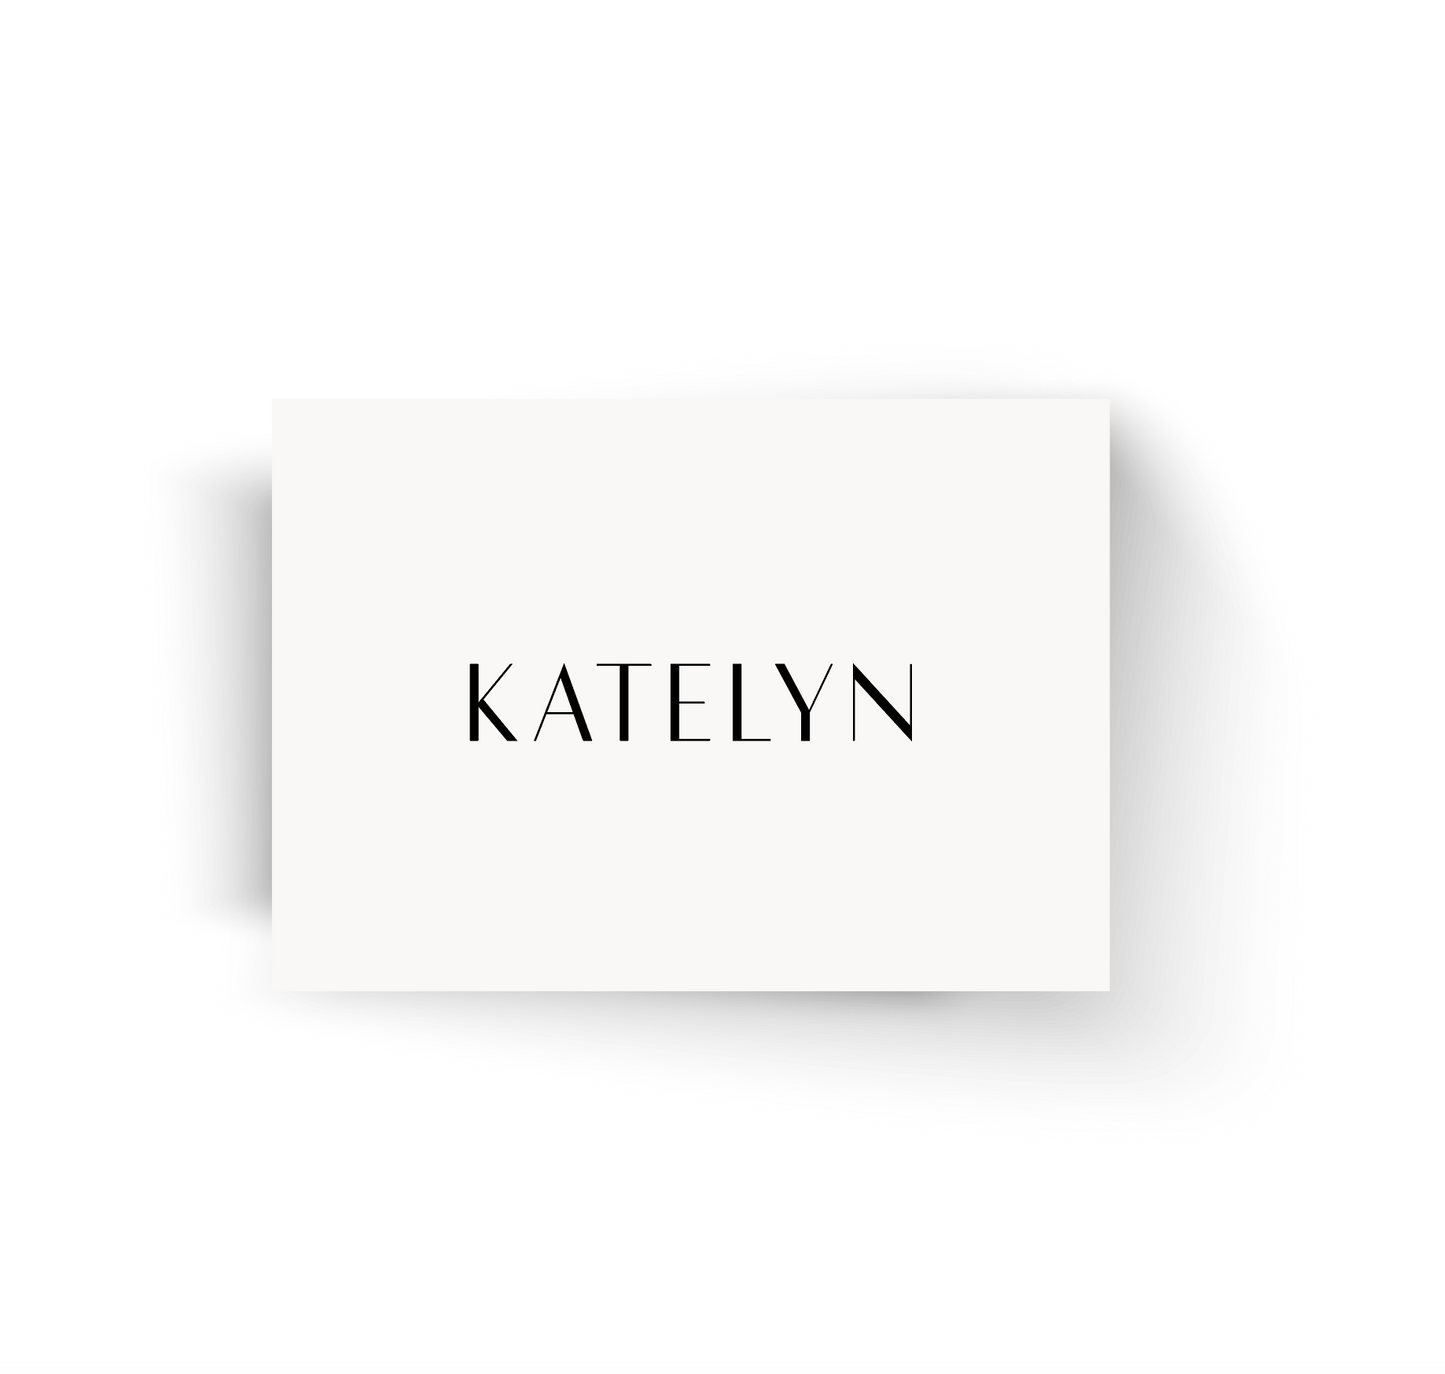 Name Cards - Personalised Place Cards